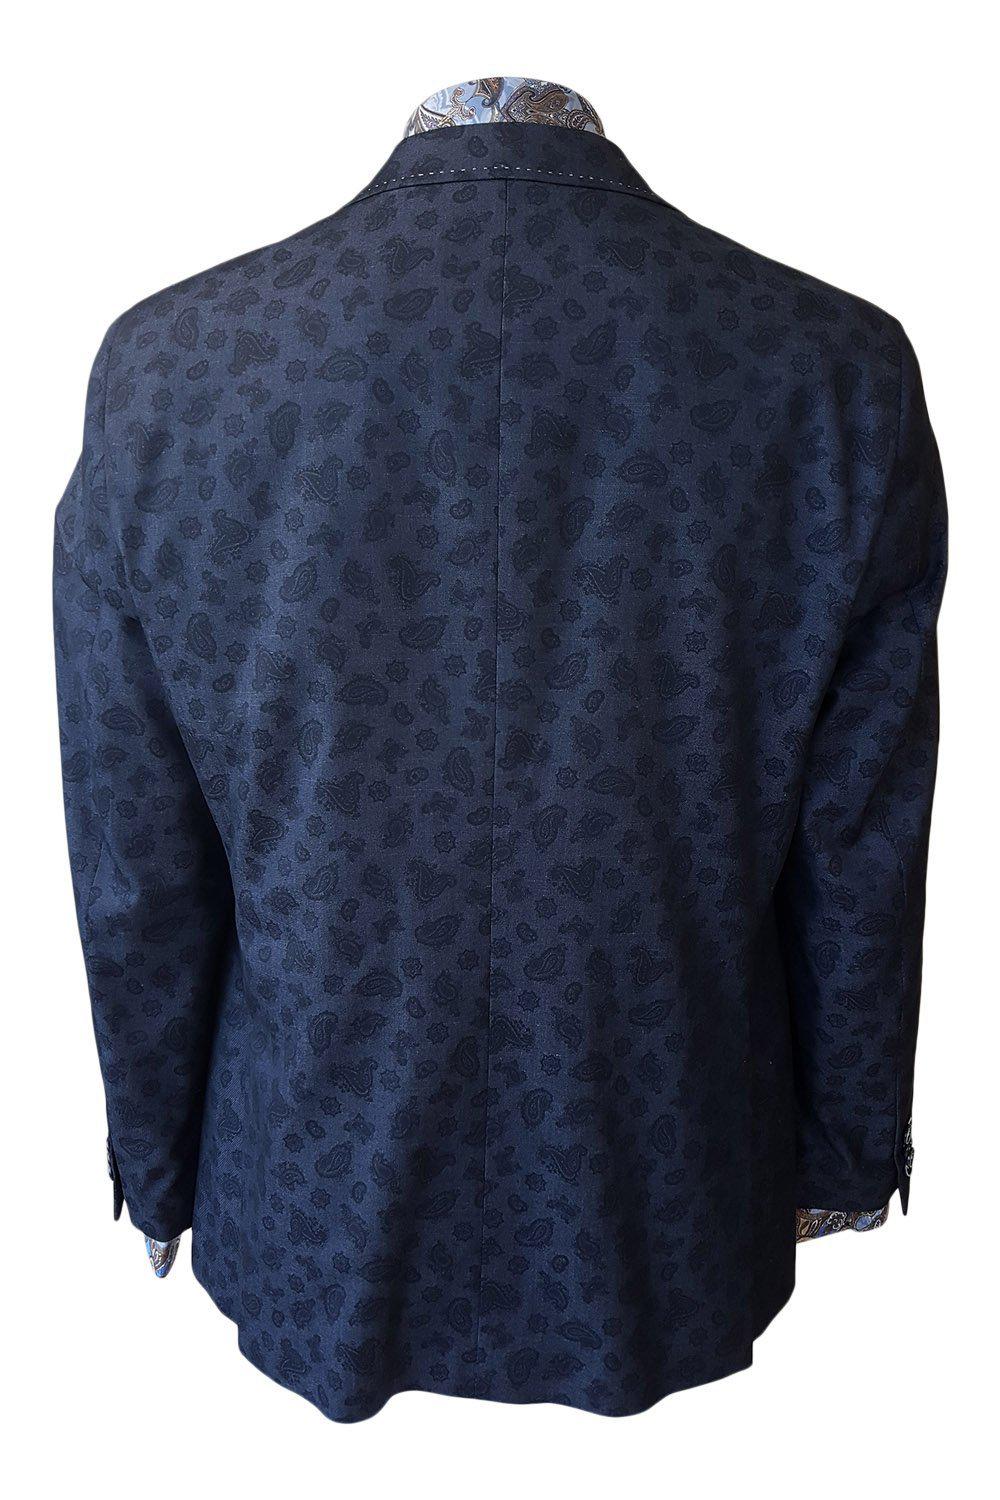 GIORDIANO Blue Paisley Print Blazer and Shirt Set (IT 52)-Giordiano-The Freperie